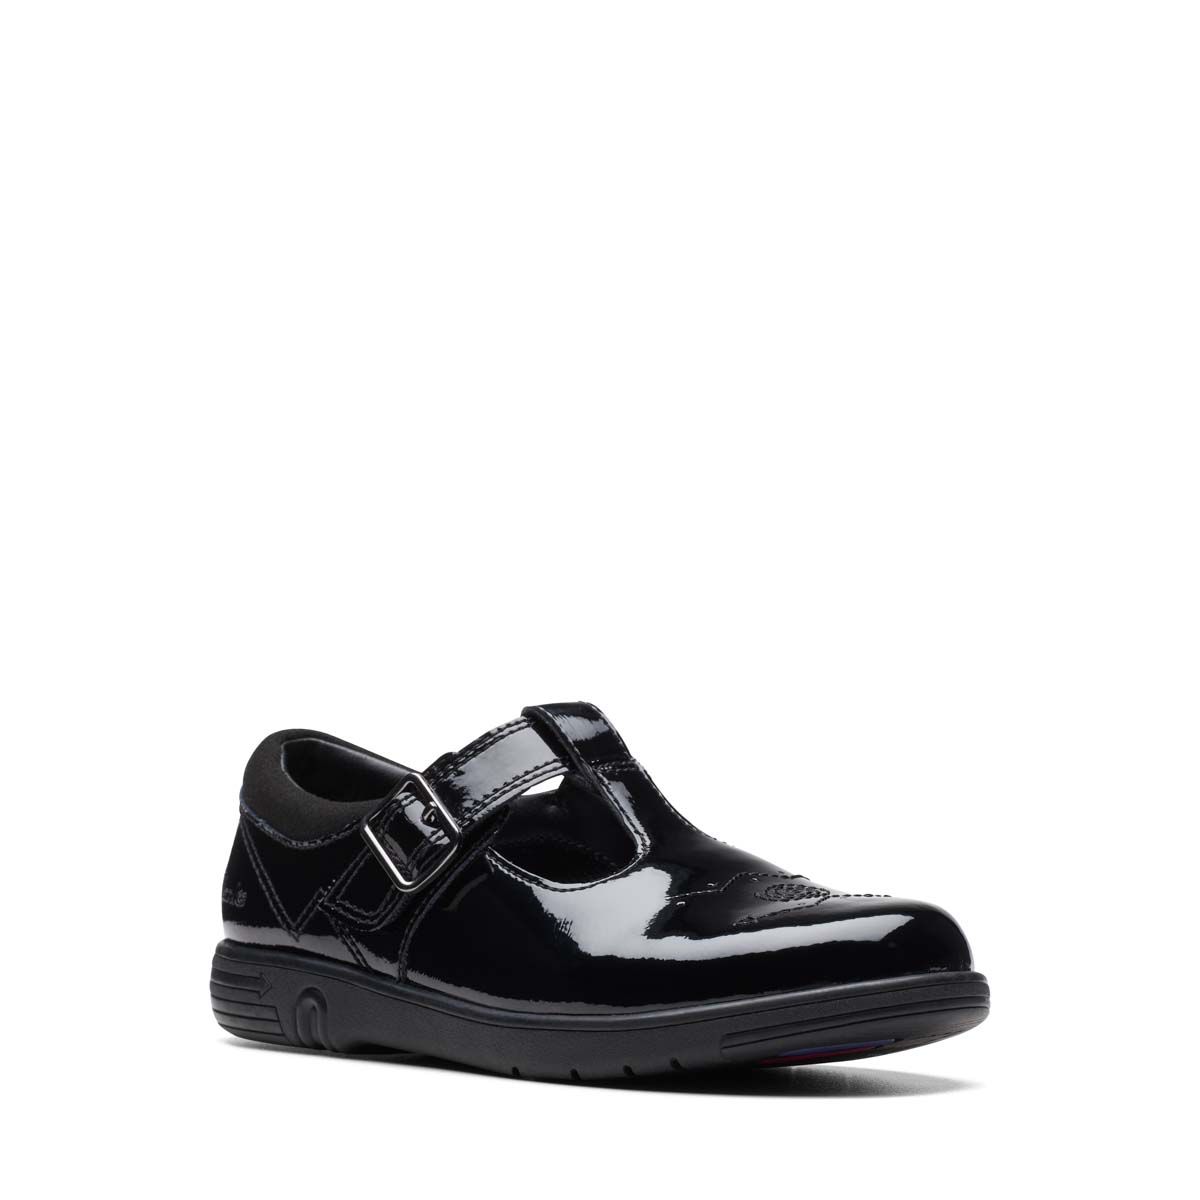 Clarks Jazzy Tap T Bar Black Patent Kids Girls School Shoes 753076F In Size 11.5 In Plain Black Patent F Width Fitting Regular Fit For School For kids